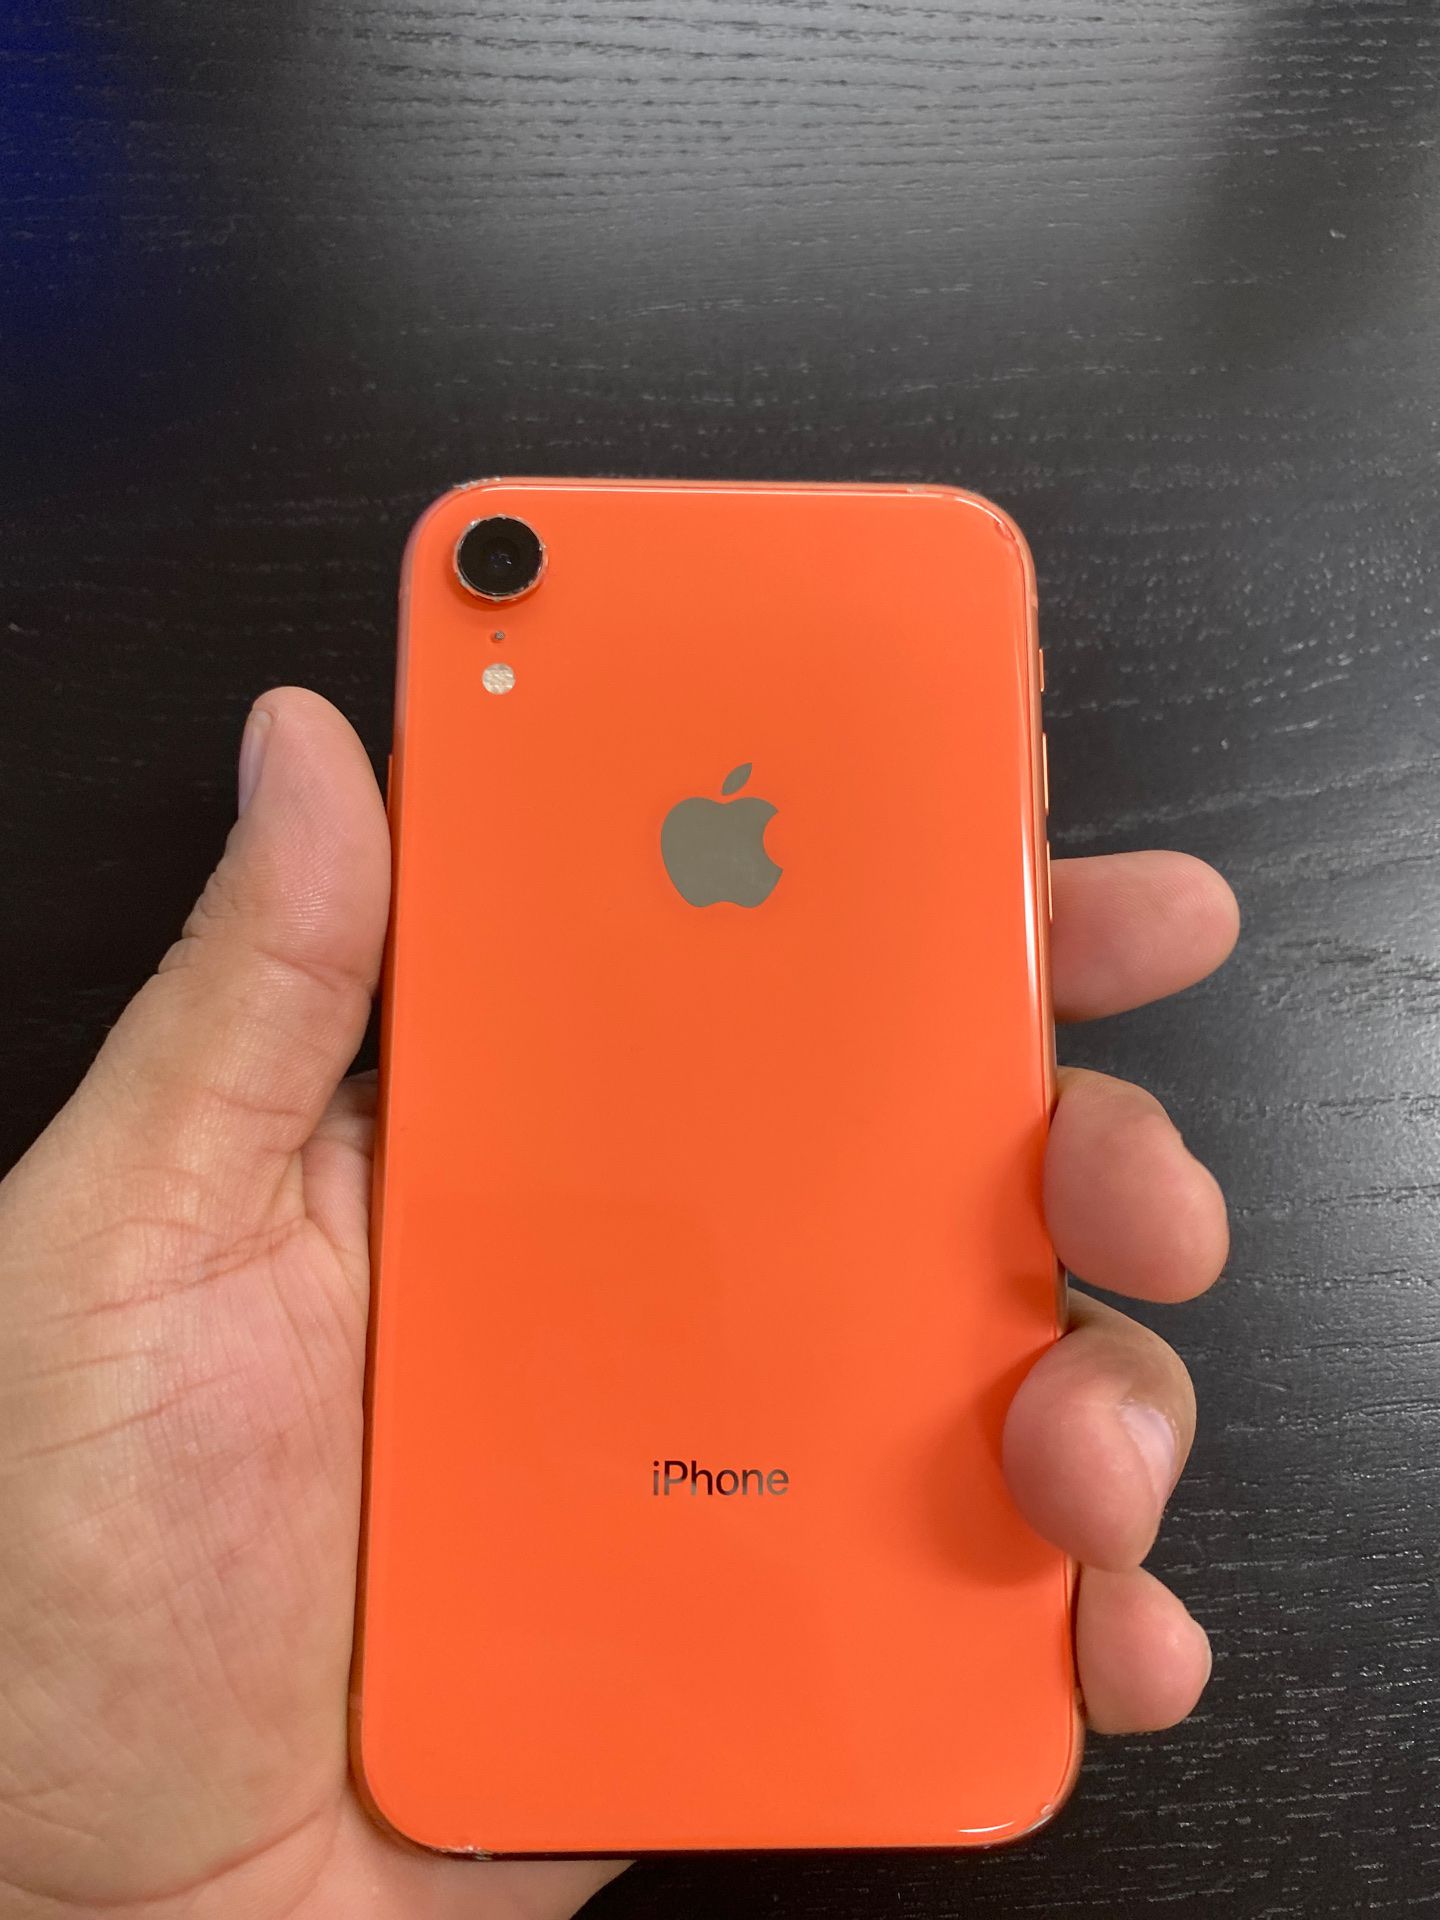 iPhone XR 128GB Unlocked To Any Prepaid Carrier T-Mobile/ Metropcs/ Simple mobile/ AT&T/Cricket wireless/ultra mobile/ Lyca mobile iPhone 6/ iPho